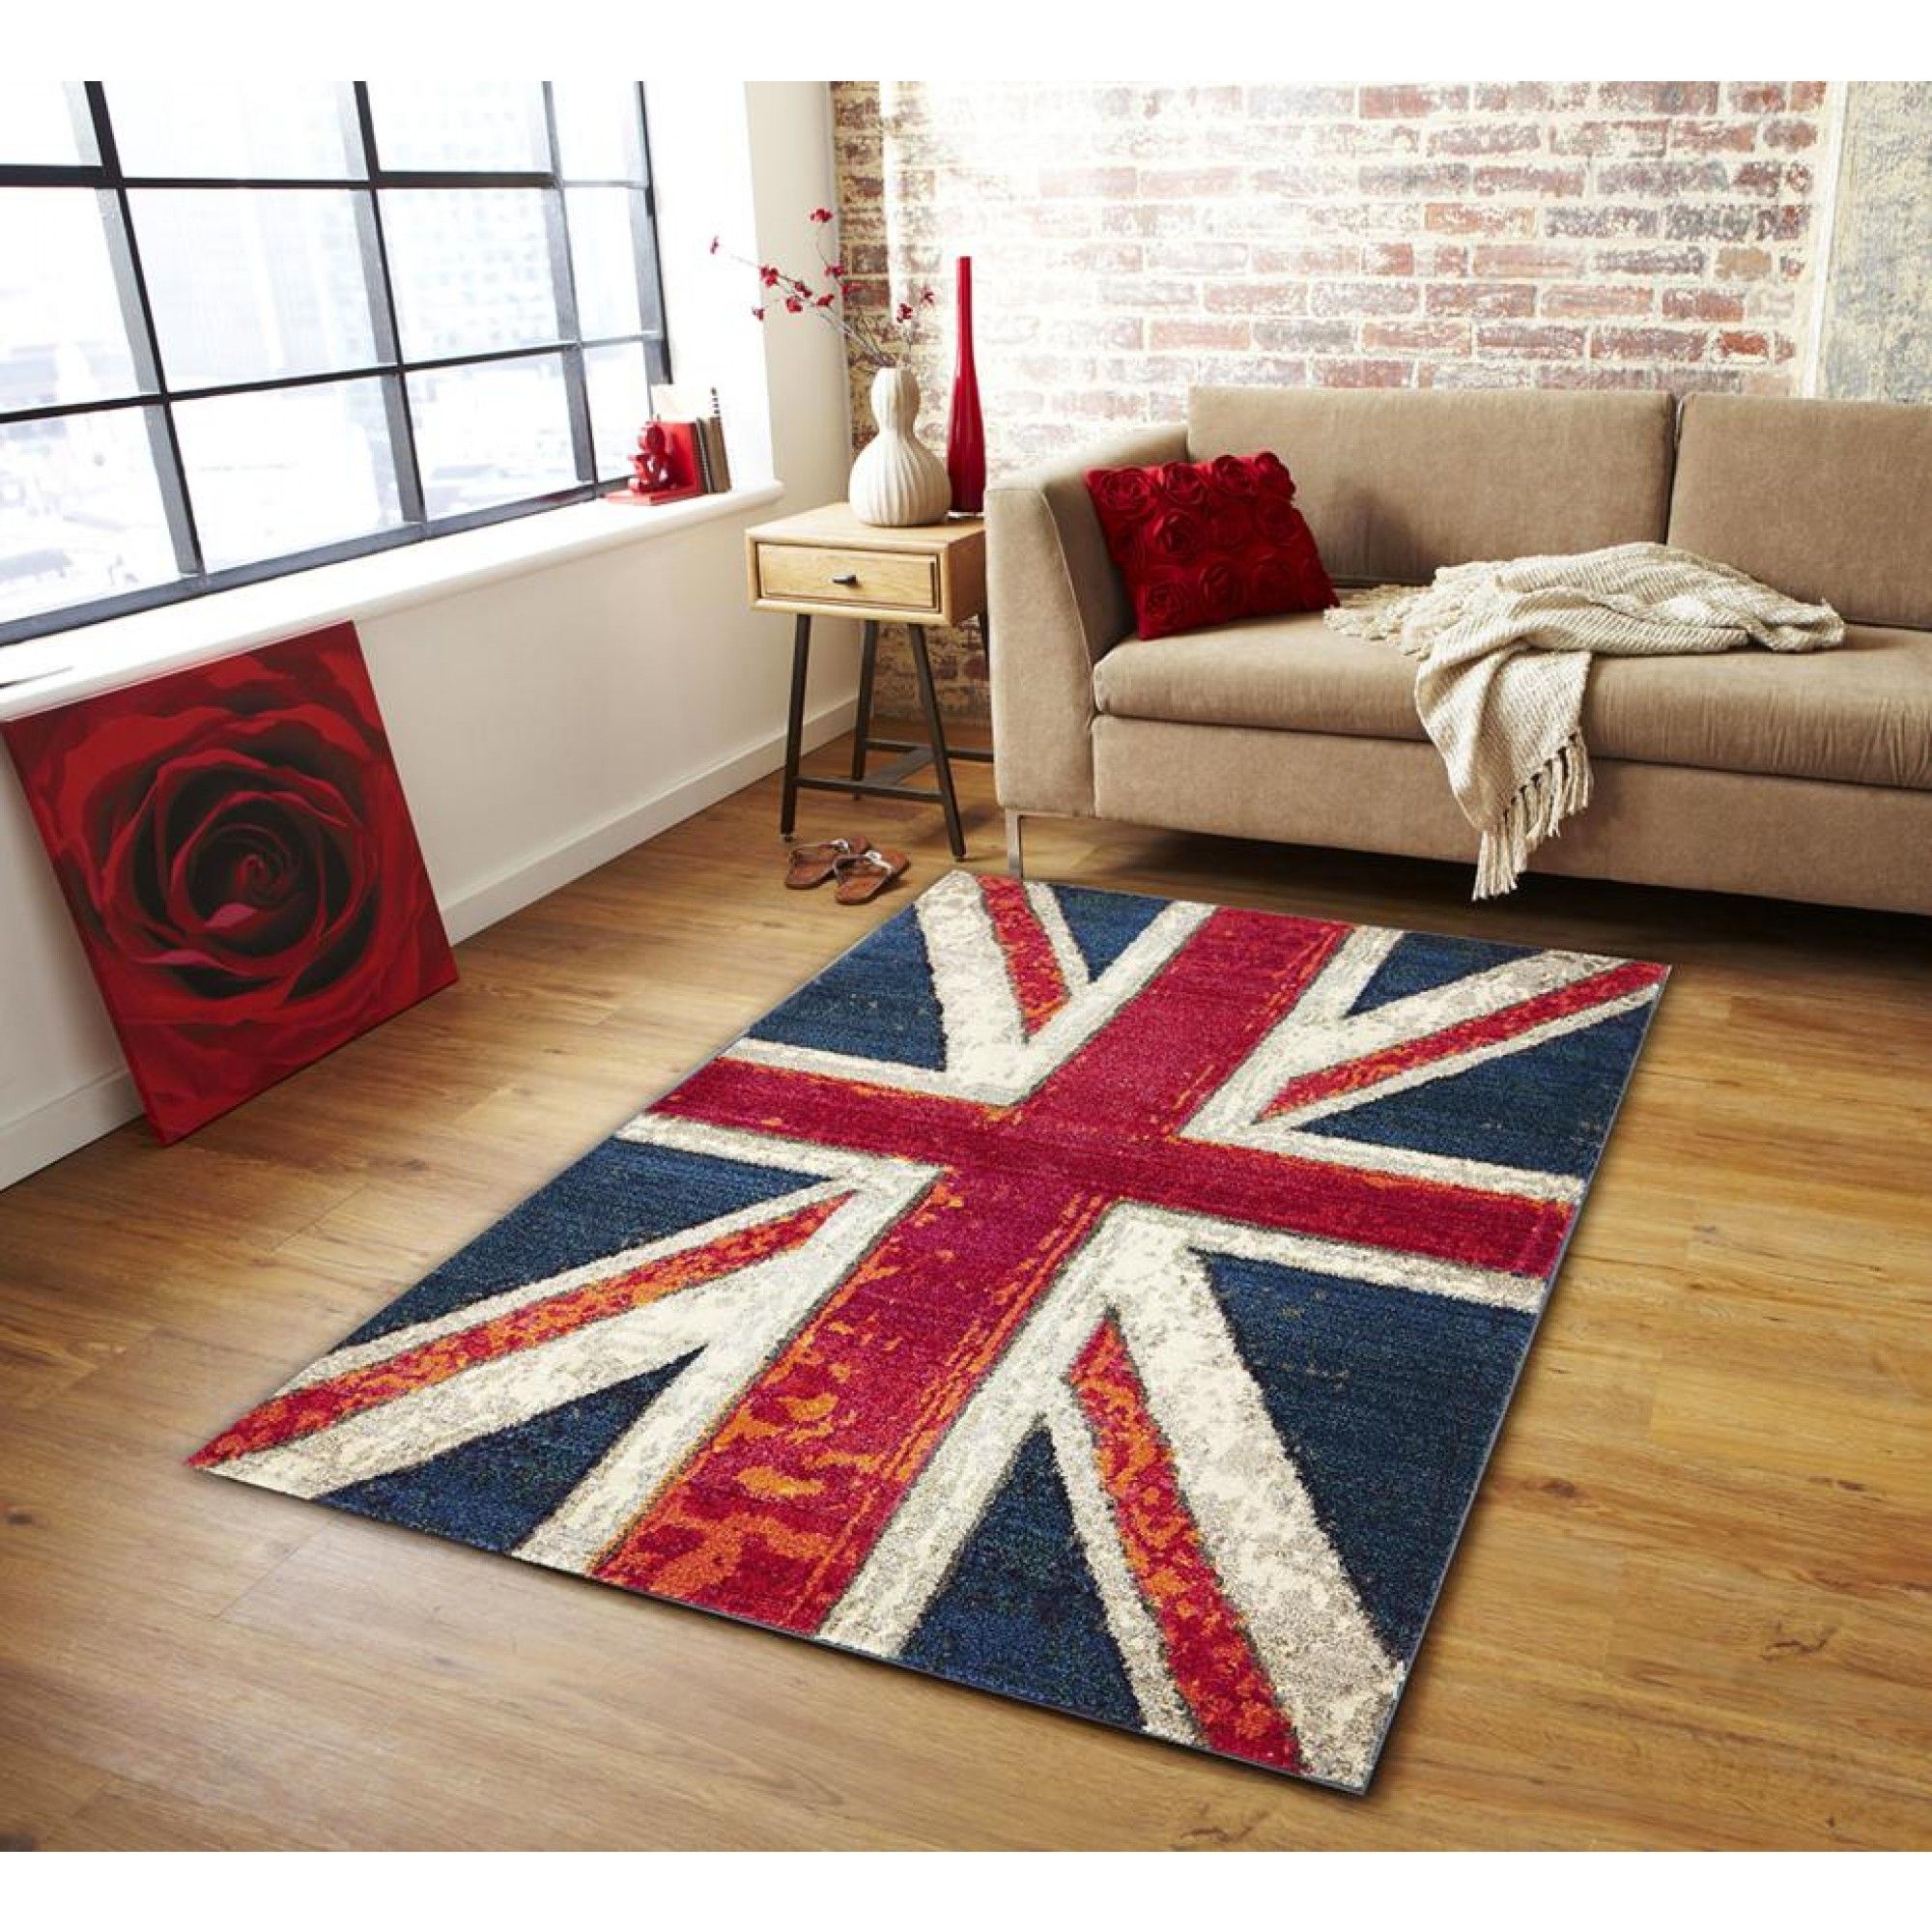 Union Jack Rugs Free Shipping Australia Wide Great Online Rug Throughout Union Jack Rugs (View 12 of 15)